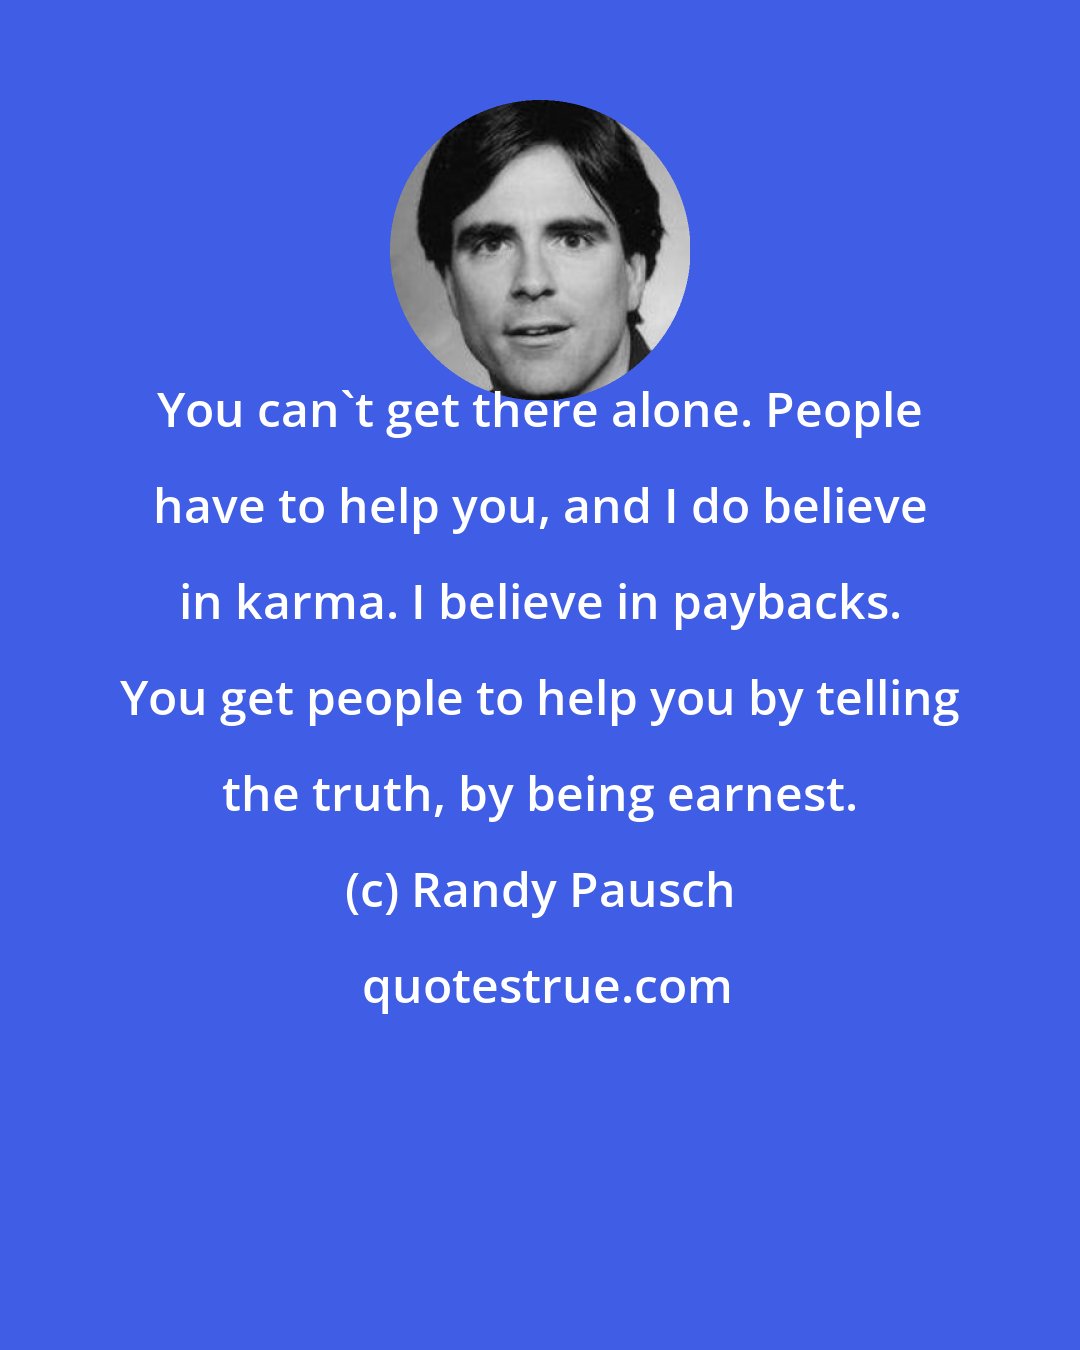 Randy Pausch: You can't get there alone. People have to help you, and I do believe in karma. I believe in paybacks. You get people to help you by telling the truth, by being earnest.